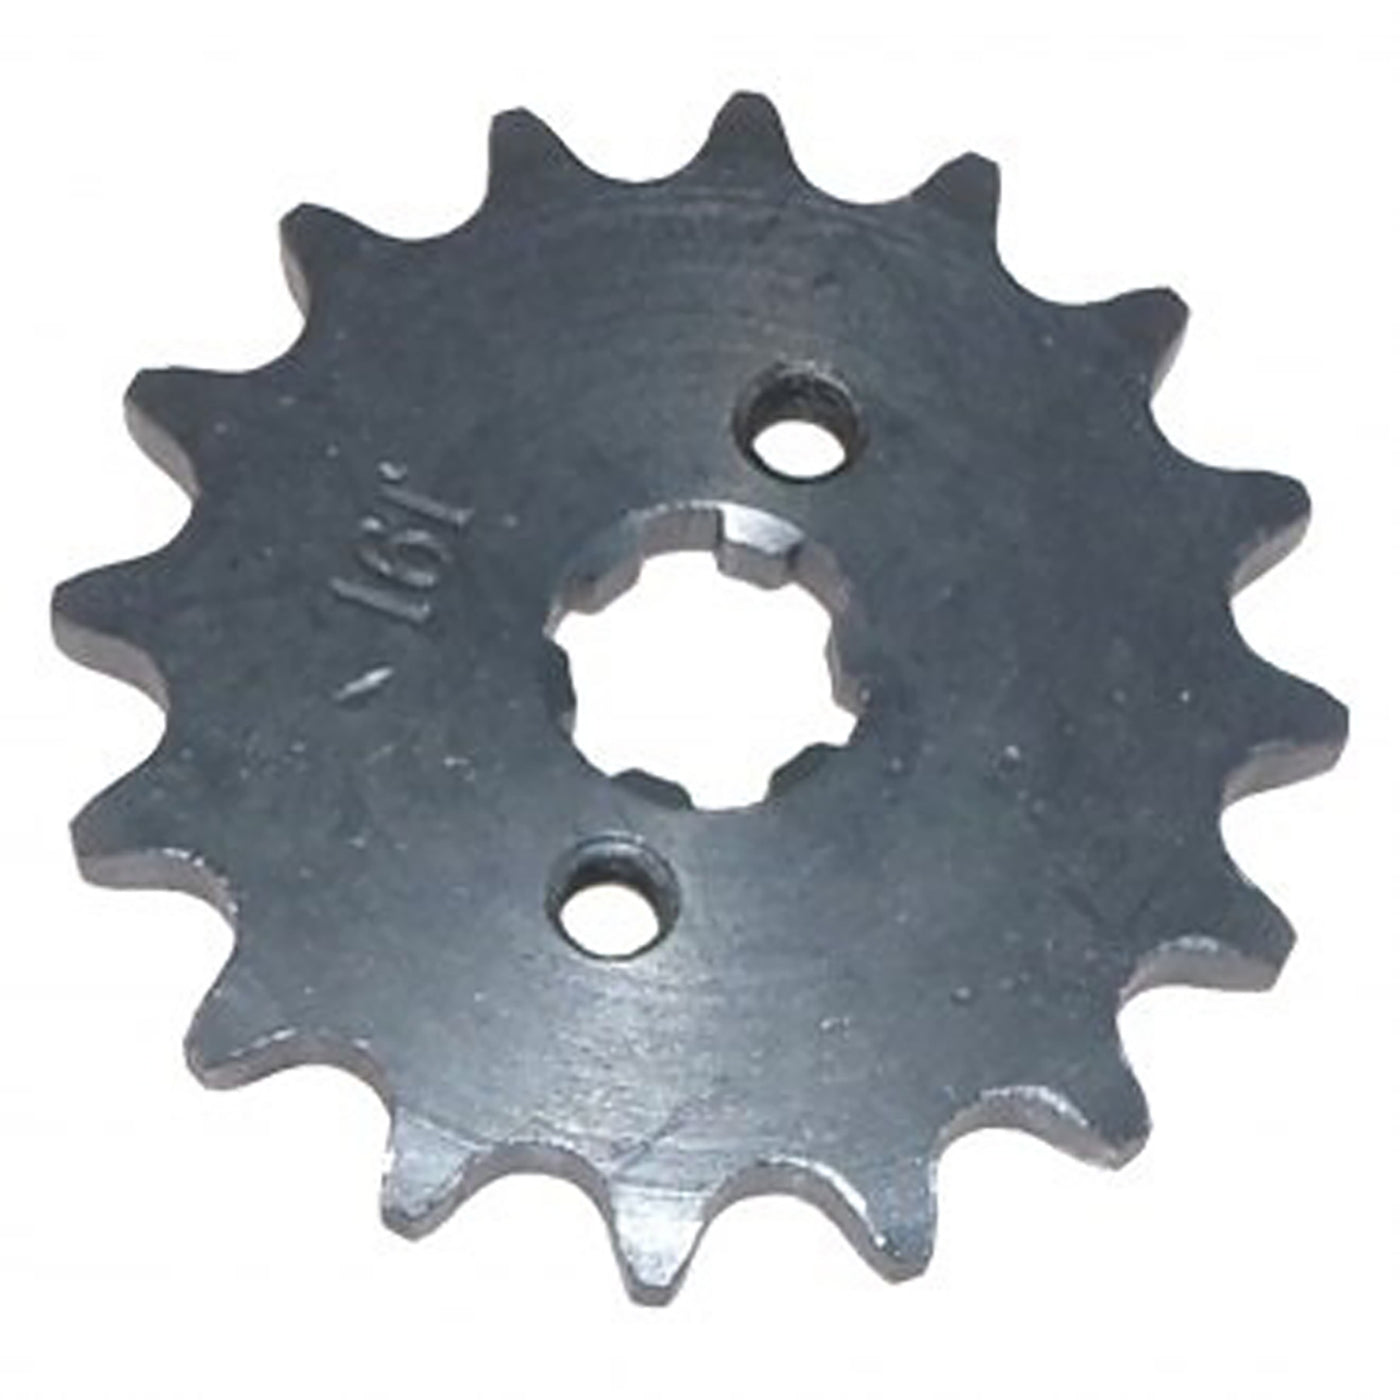 Emgo 95-80011 Drive Sprocket 11 Tooth #95-80011